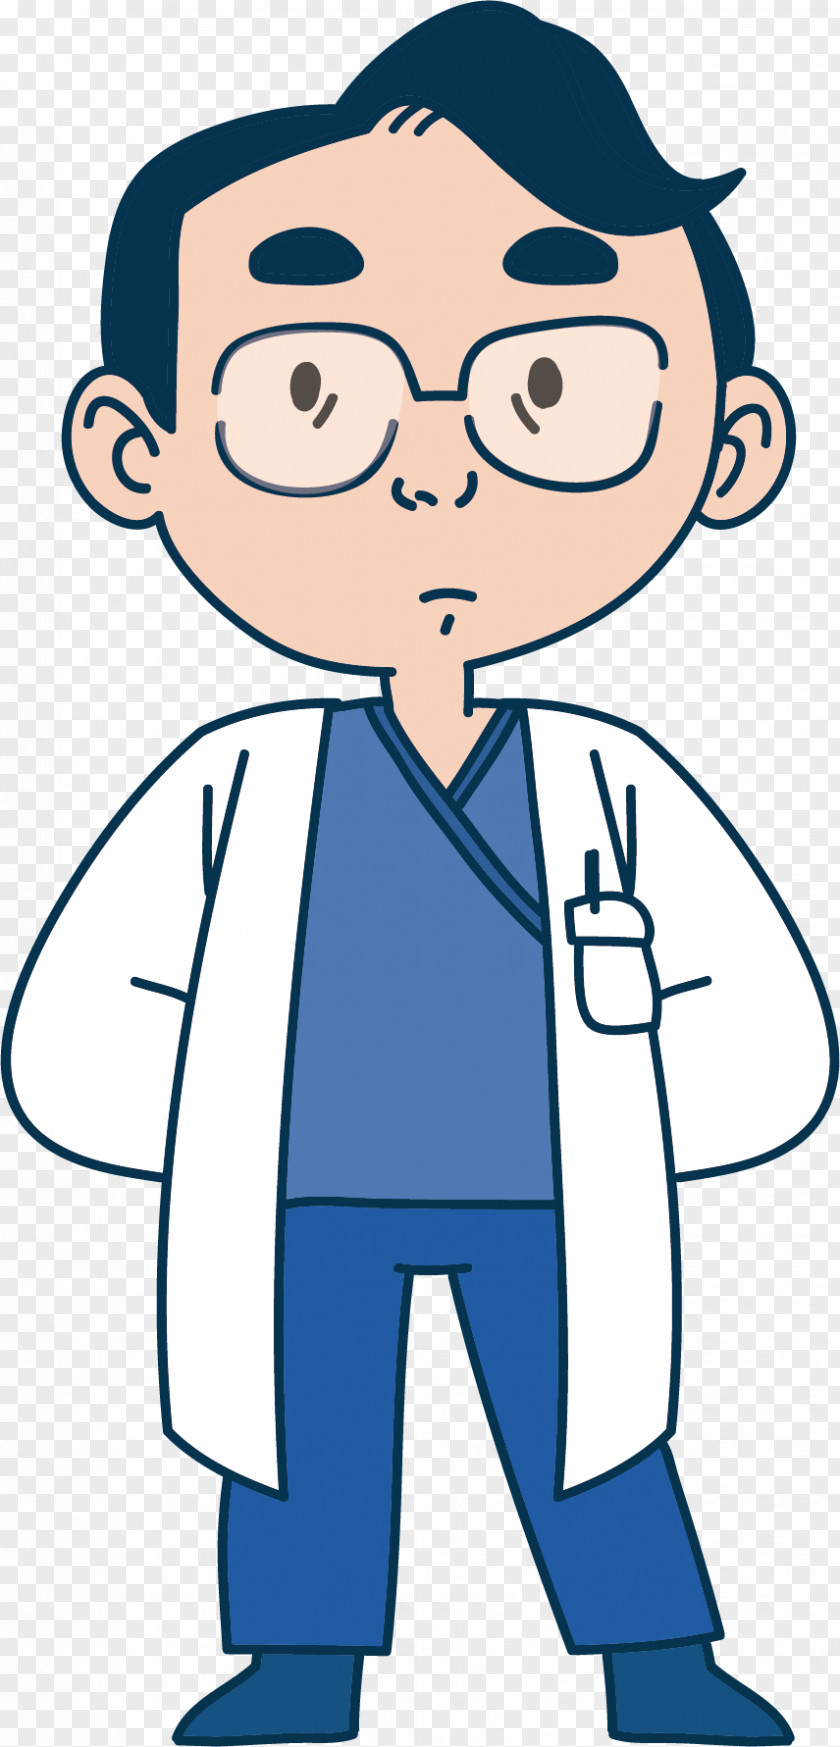 Doctor With Glasses Cartoon Illustration PNG